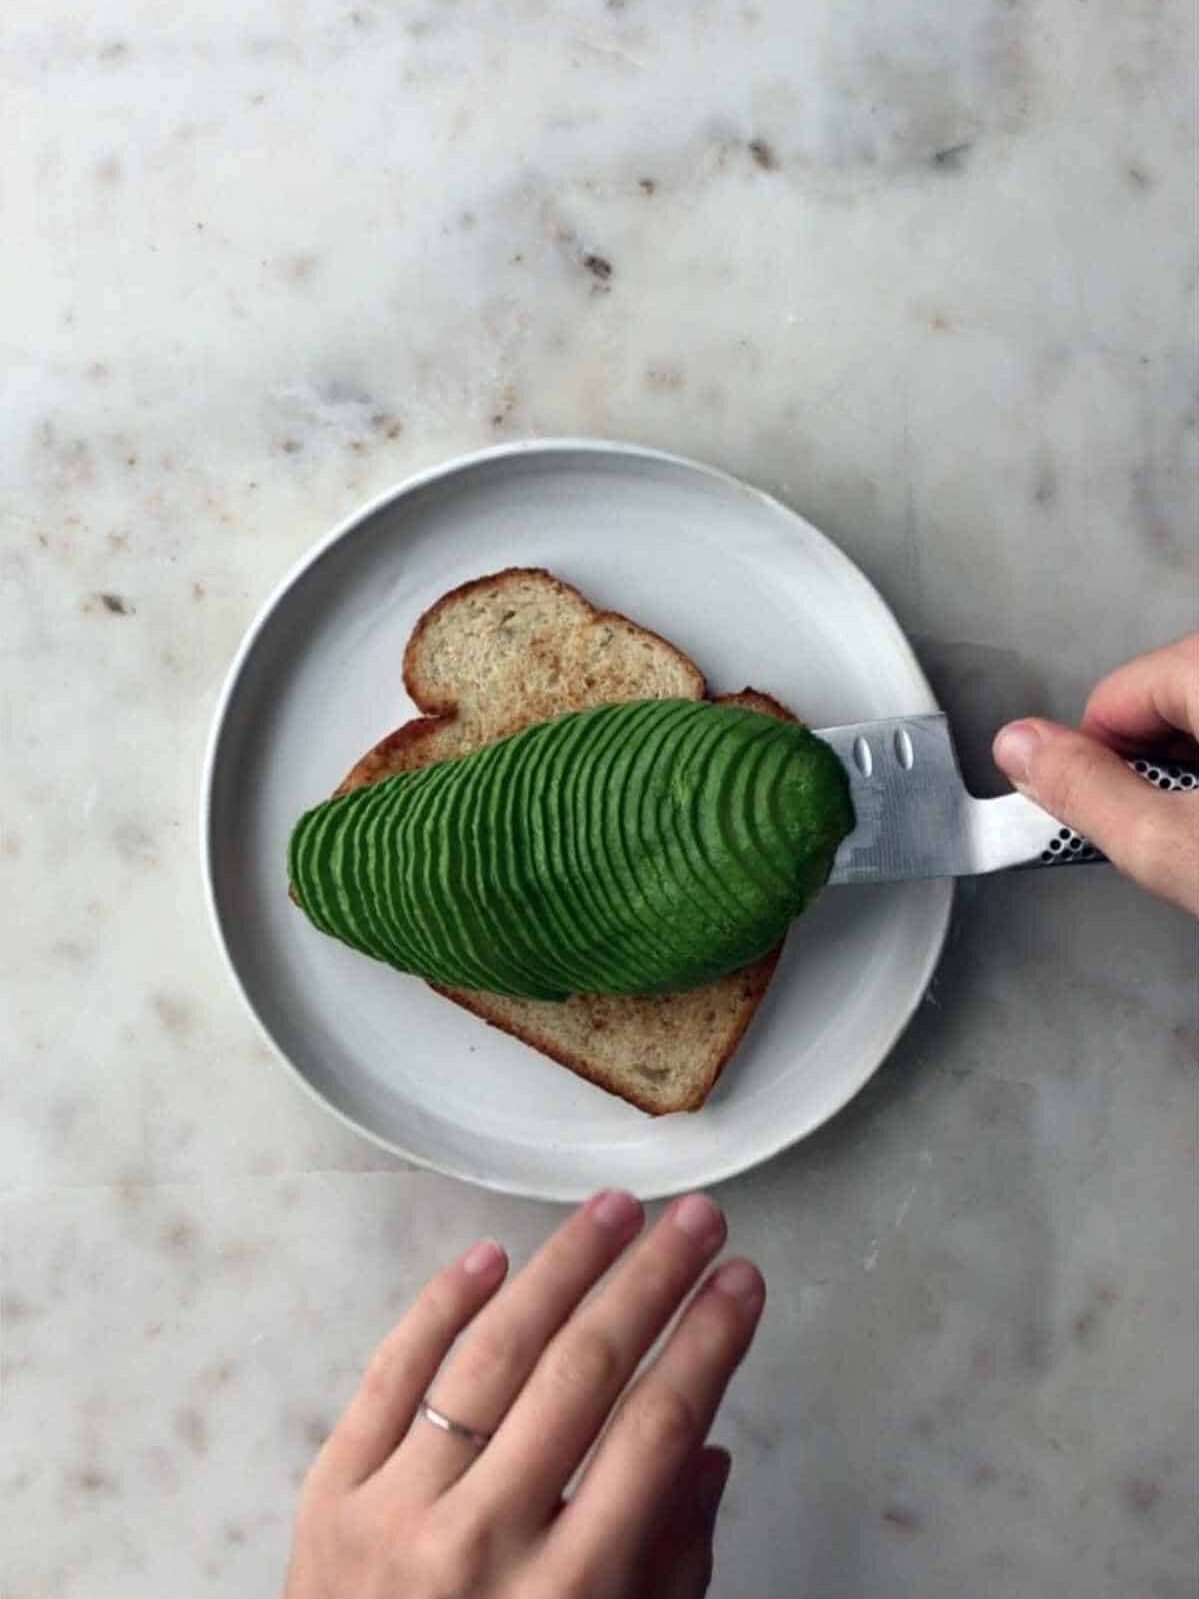 Sliced avocado being placed on a slice of toast by a hand holding it on a knife.